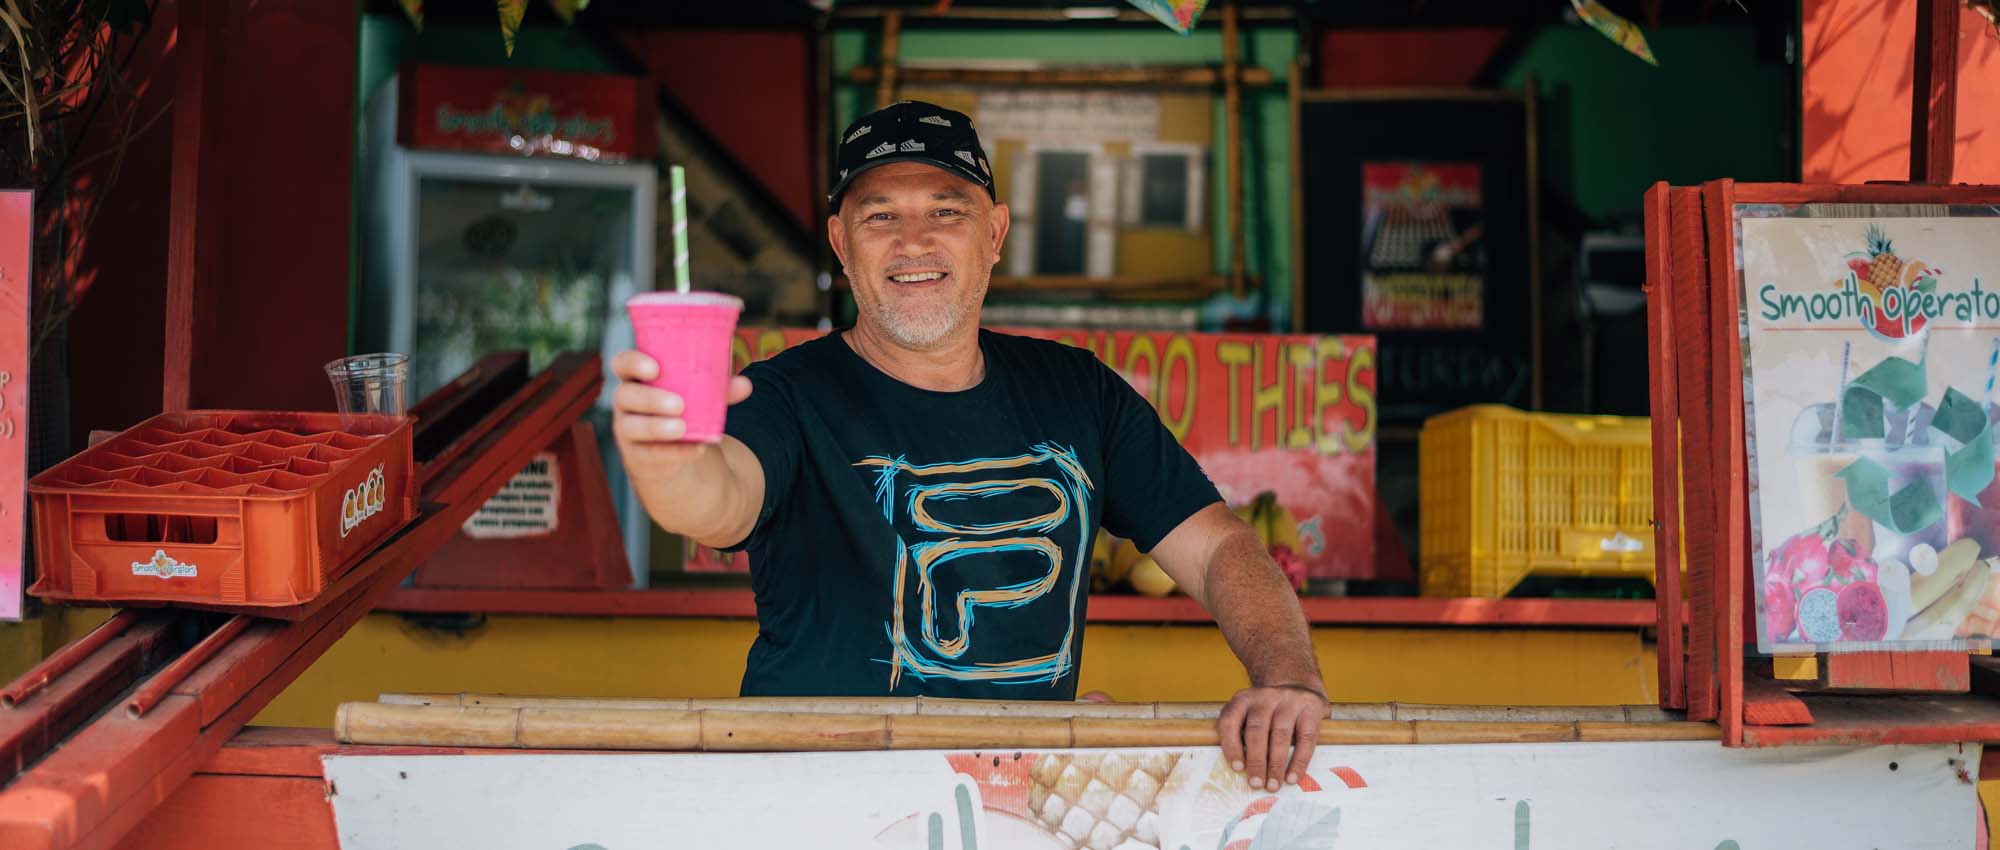 Man holding smoothie and smiling at camera